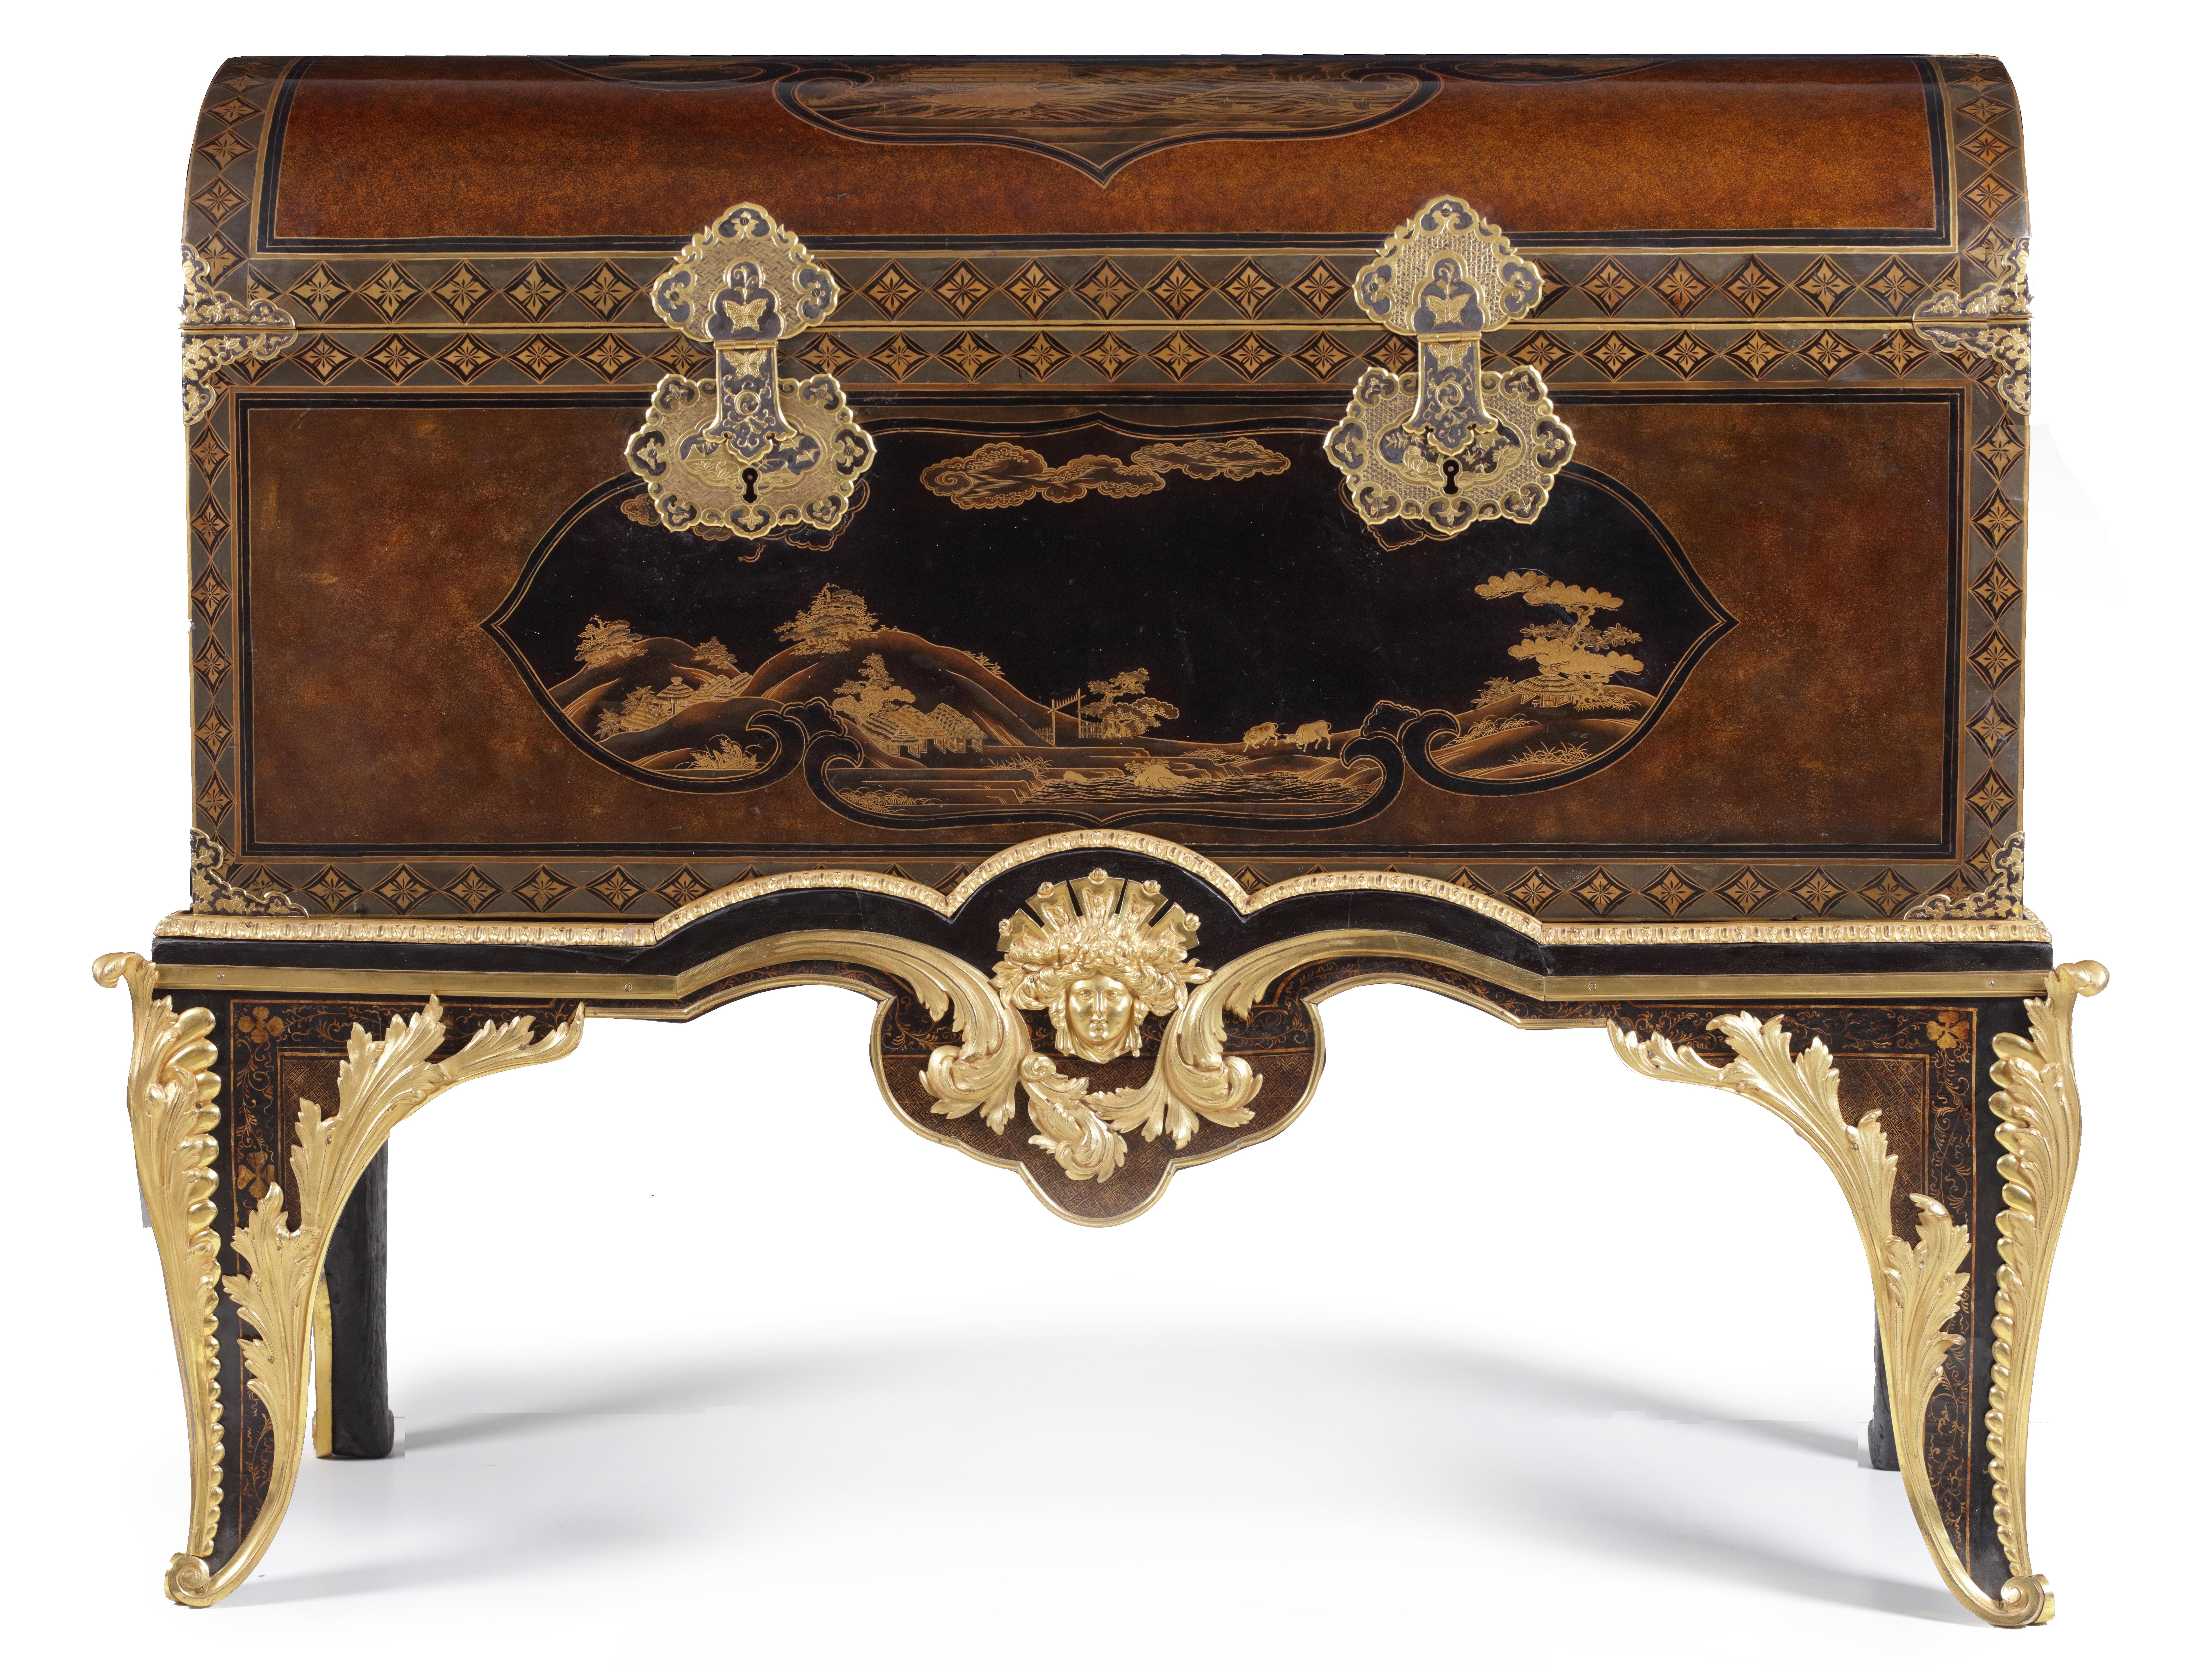 An impressive and large Japanese 'Namban' transition-style lacquer coffer with fine gilt copper mounts on a French Re´gence base, possibly by André-Charles Boulle (1642-1732)

Kyoto, 1640-1650, the base 18th century

?The coffer with shaped